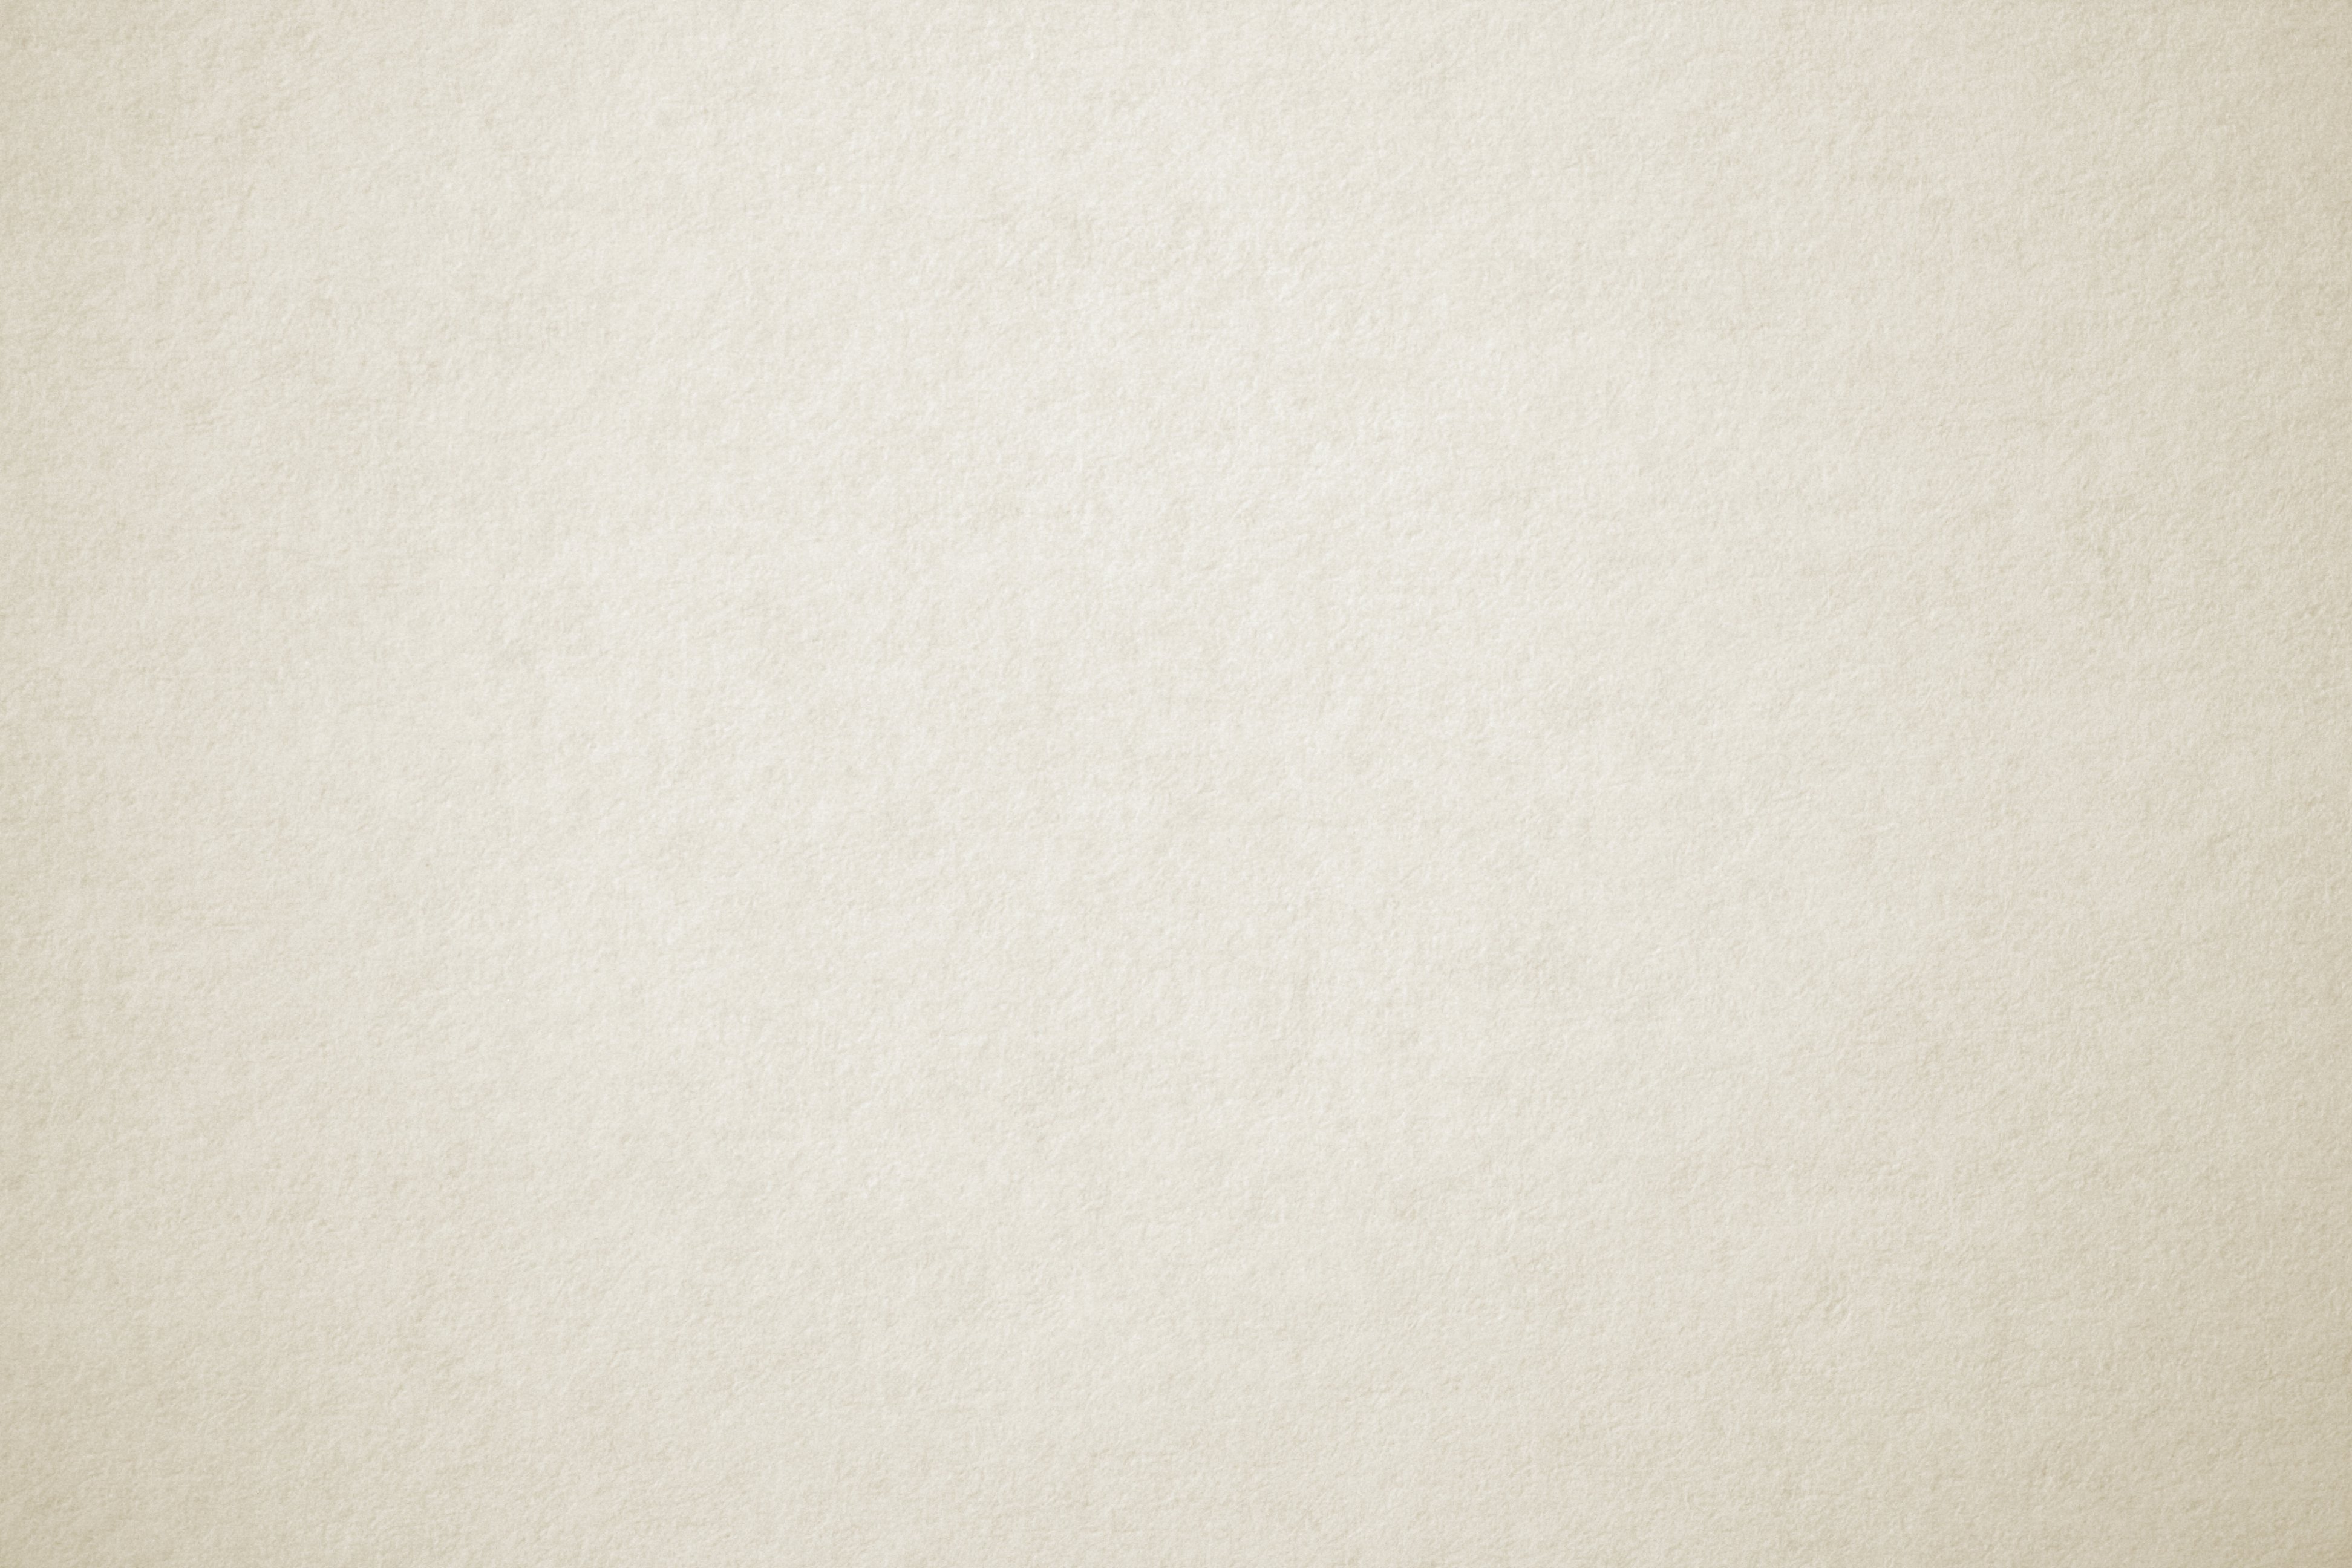 Beige Paper Texture High Resolution Photo Dimensions